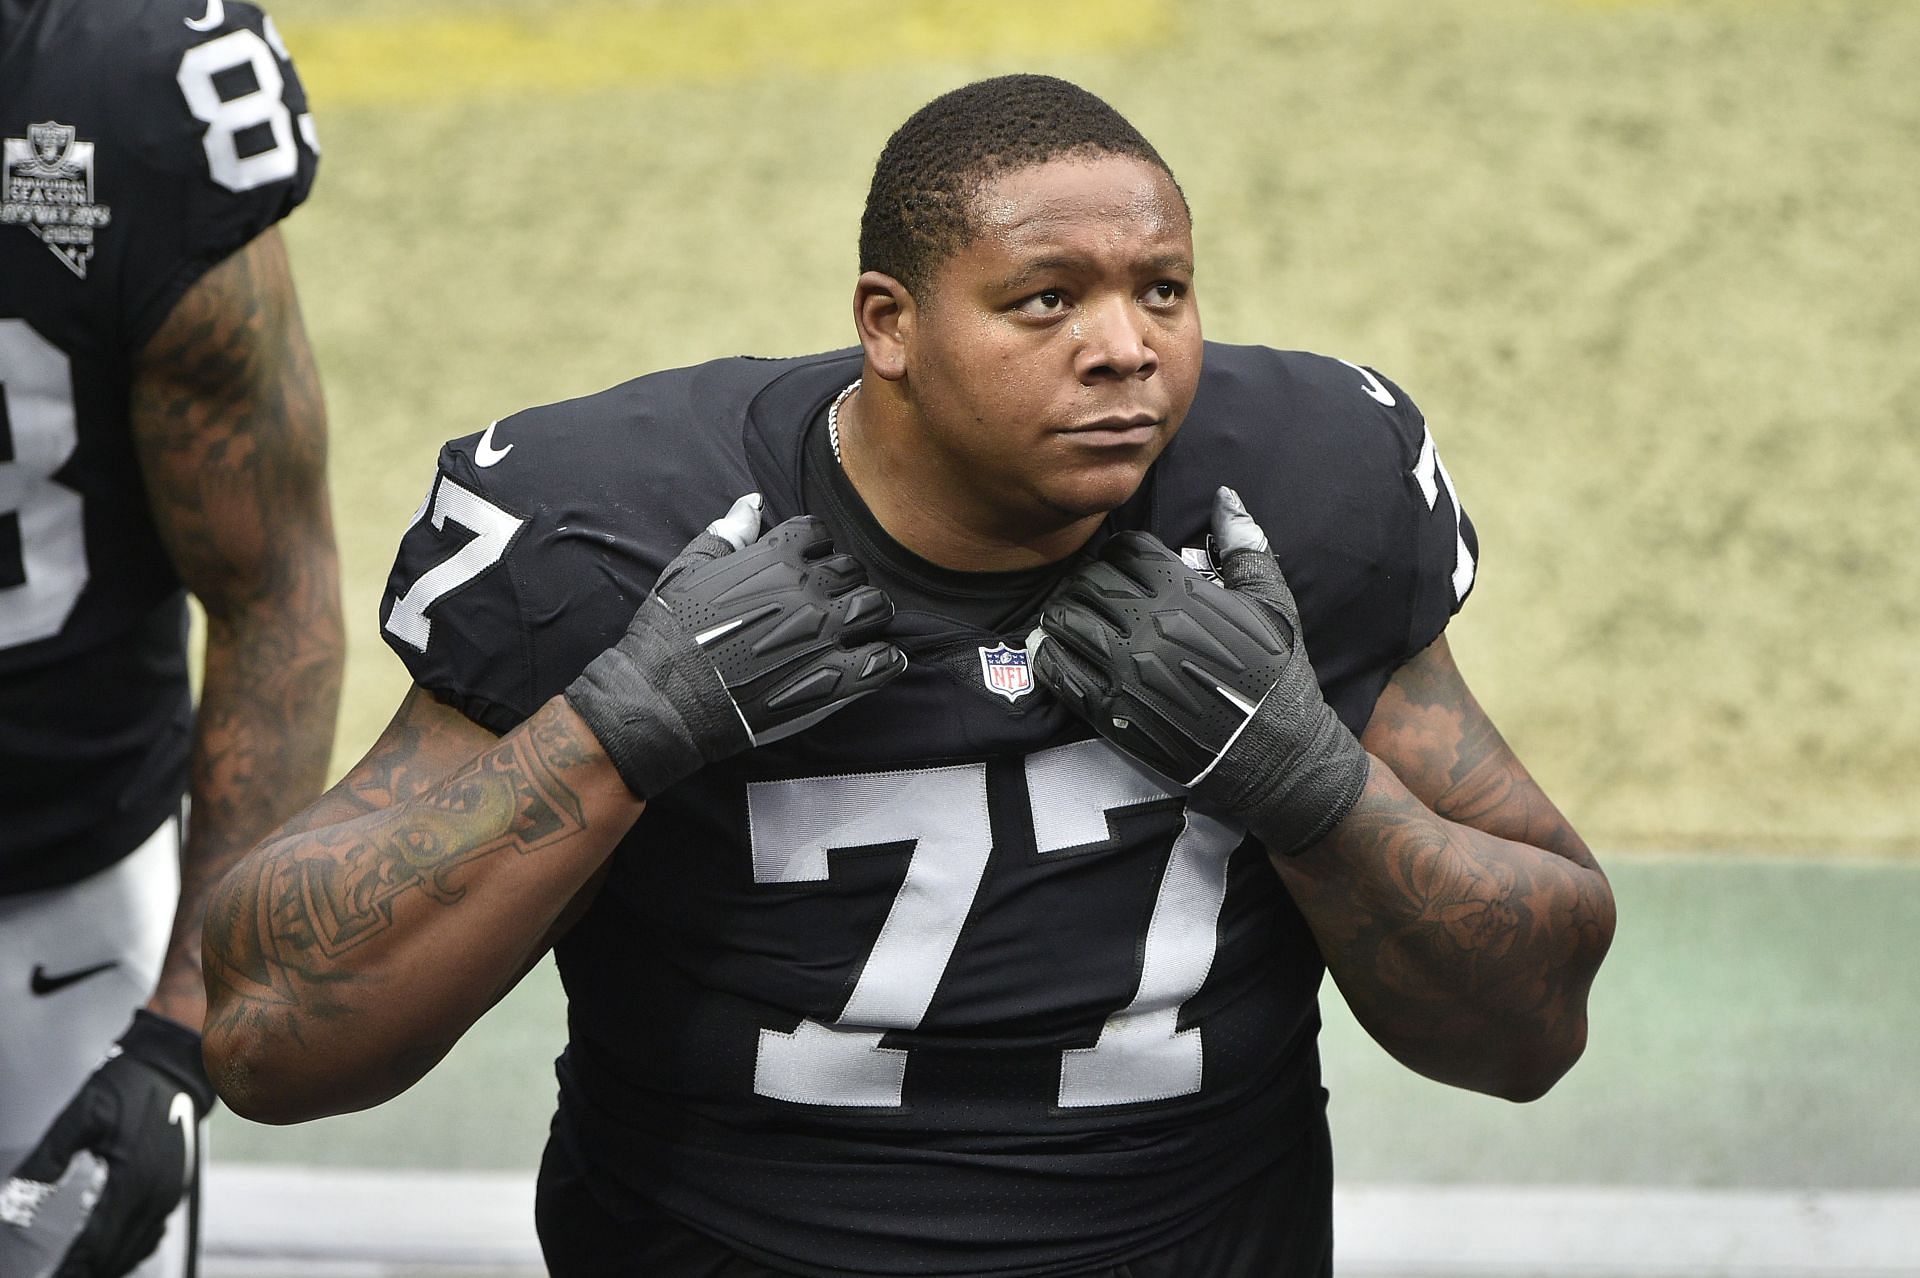 Trent Brown is the largest player in the NFL today